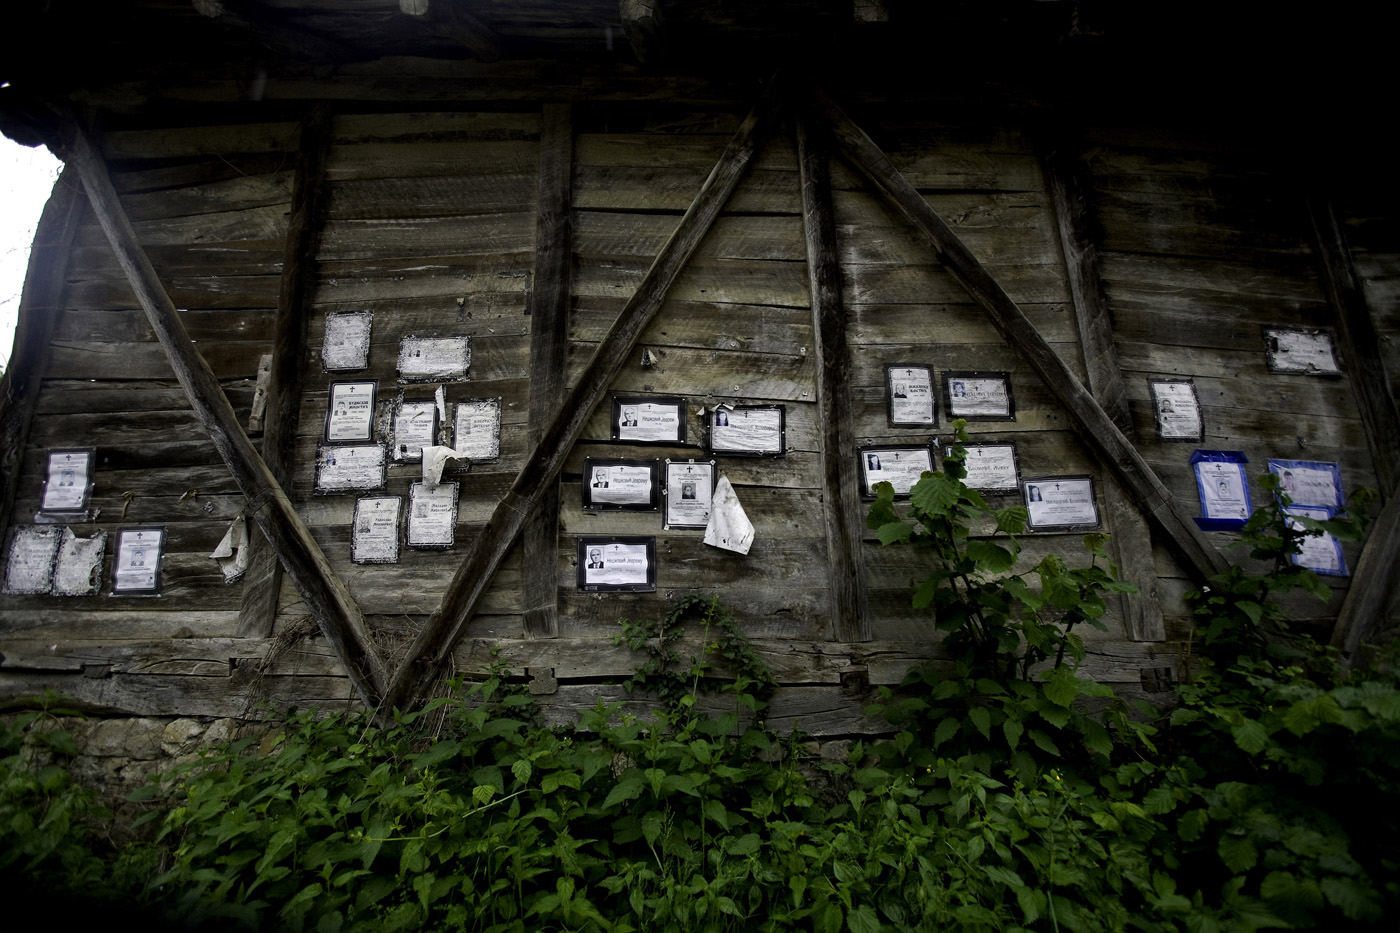 Obituaries on the barn in one of the villages in east serbia on the mountain of Stara planina. Almast all of them date couple of years ago, because village is unpopulated now. Only some road workers and travelers pass through it.